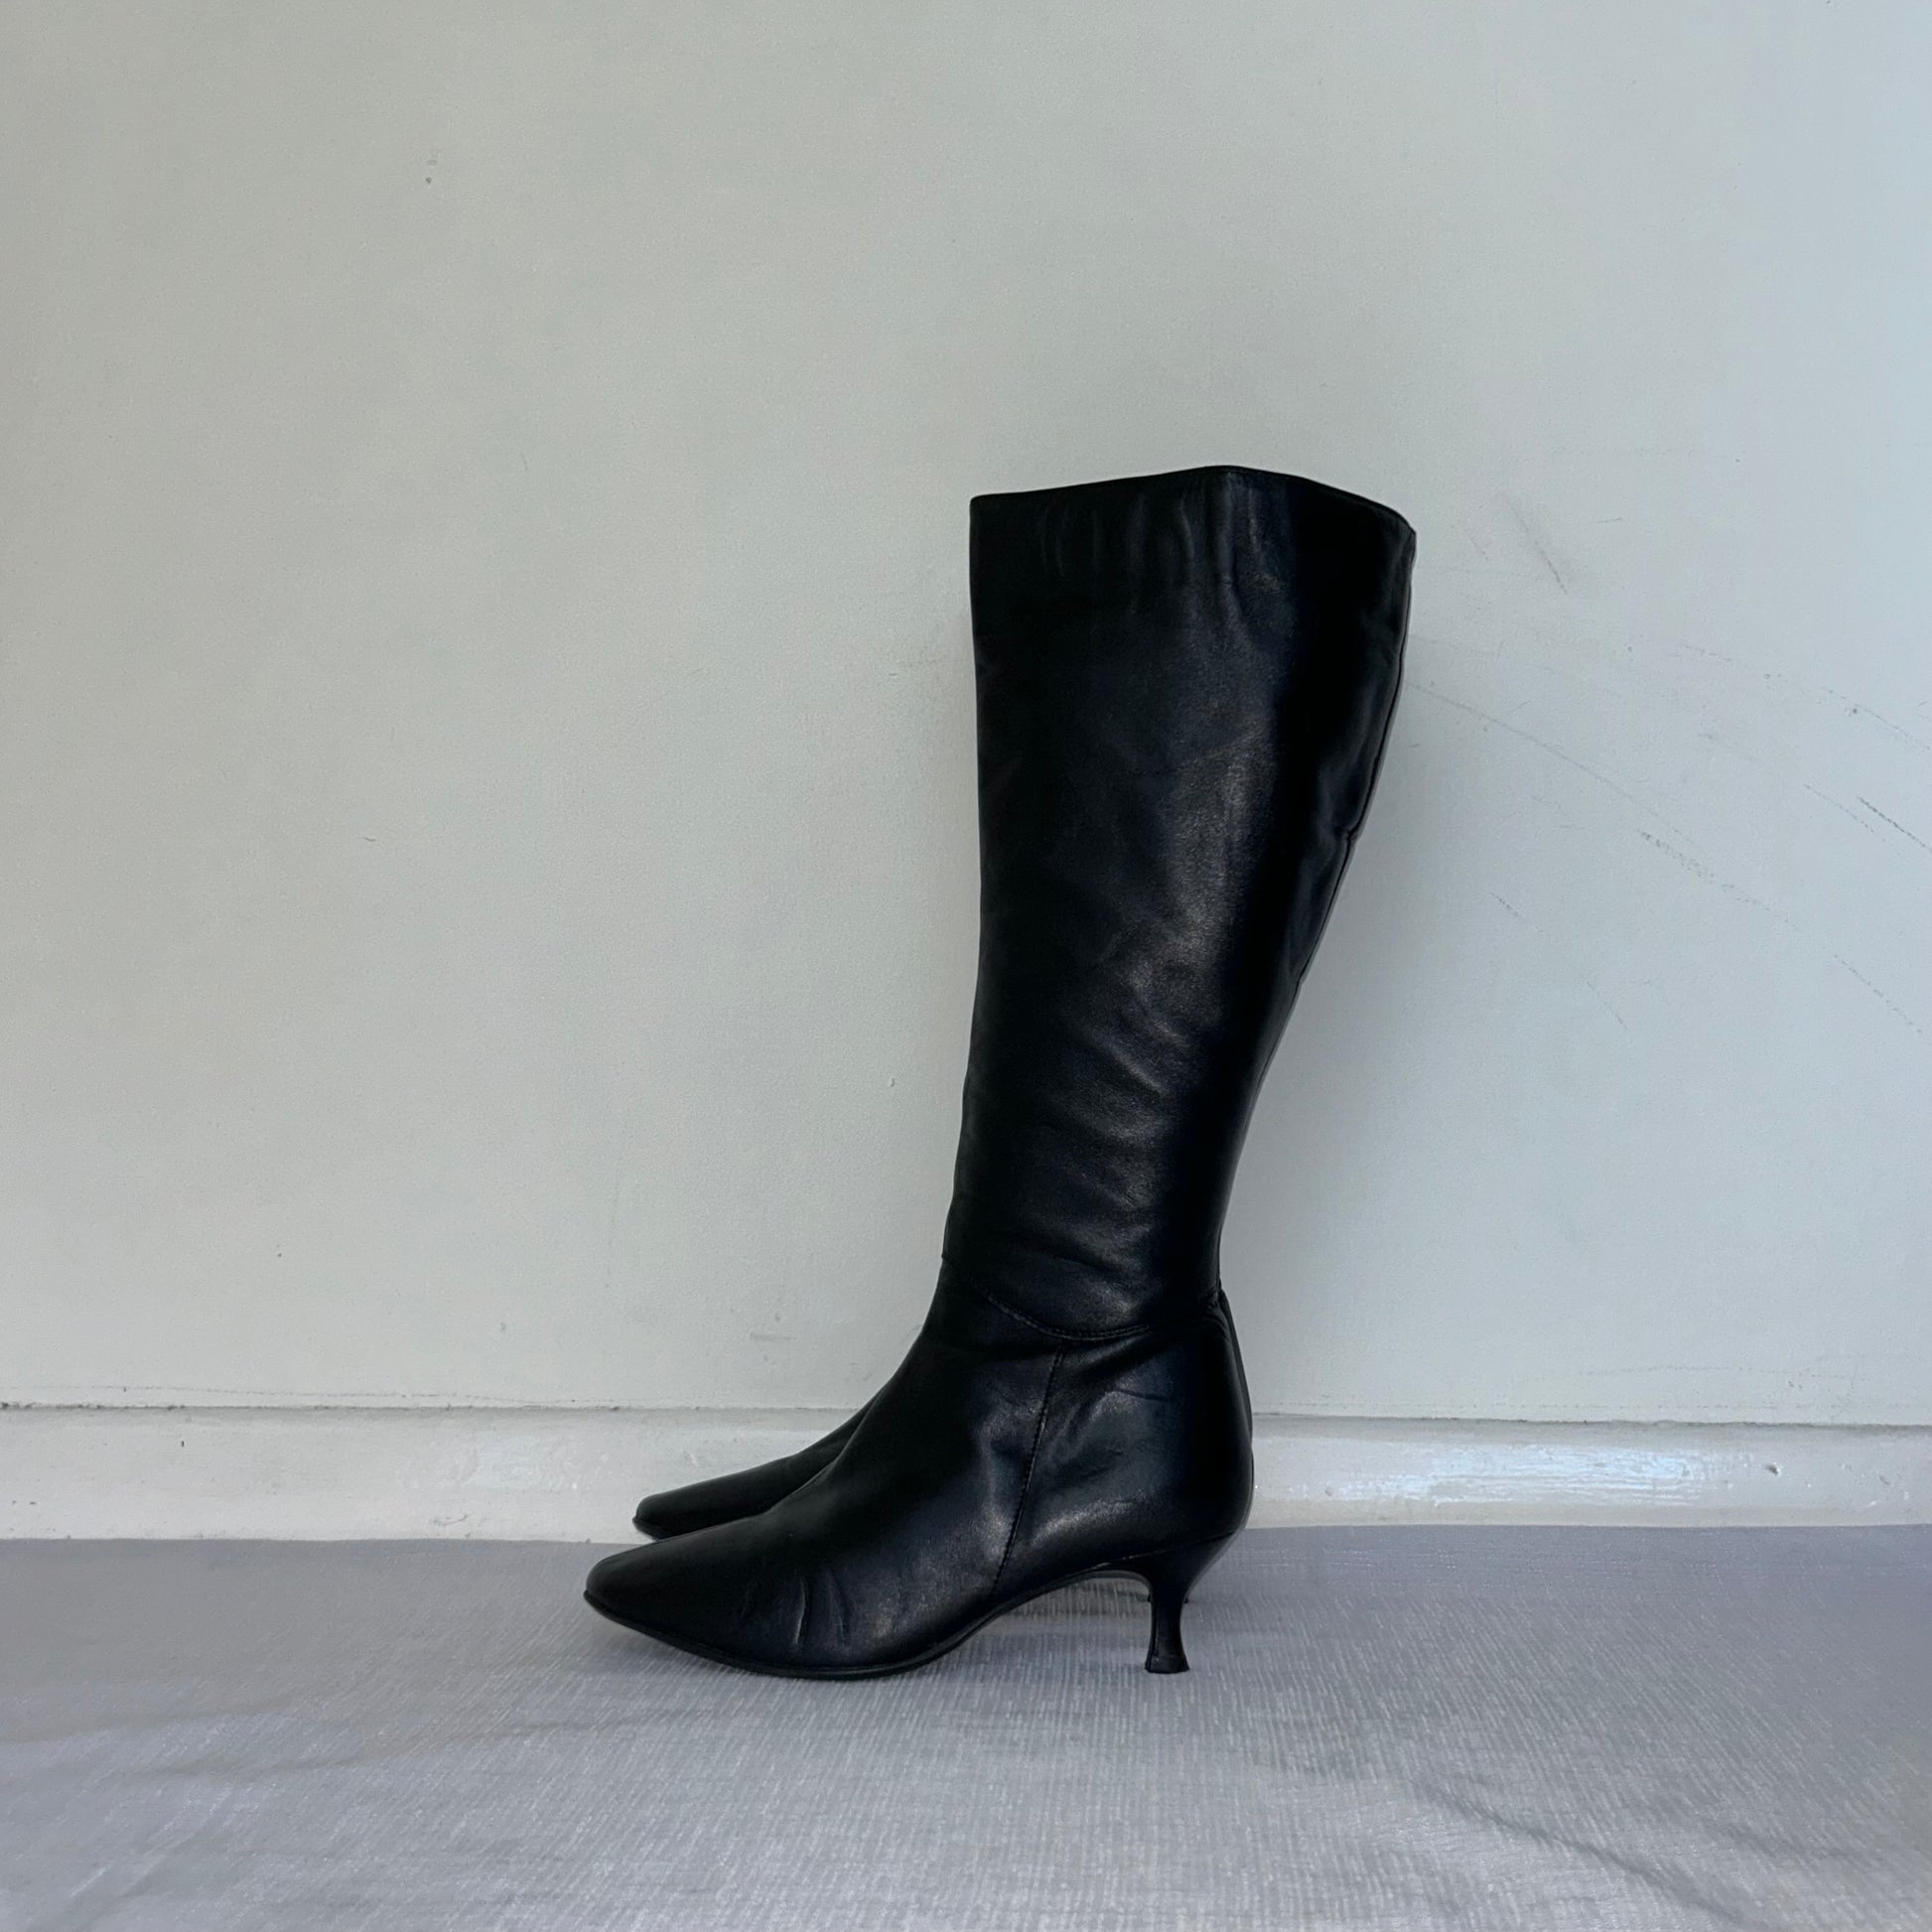 black knee high kitten heel leather boots shown on a white background